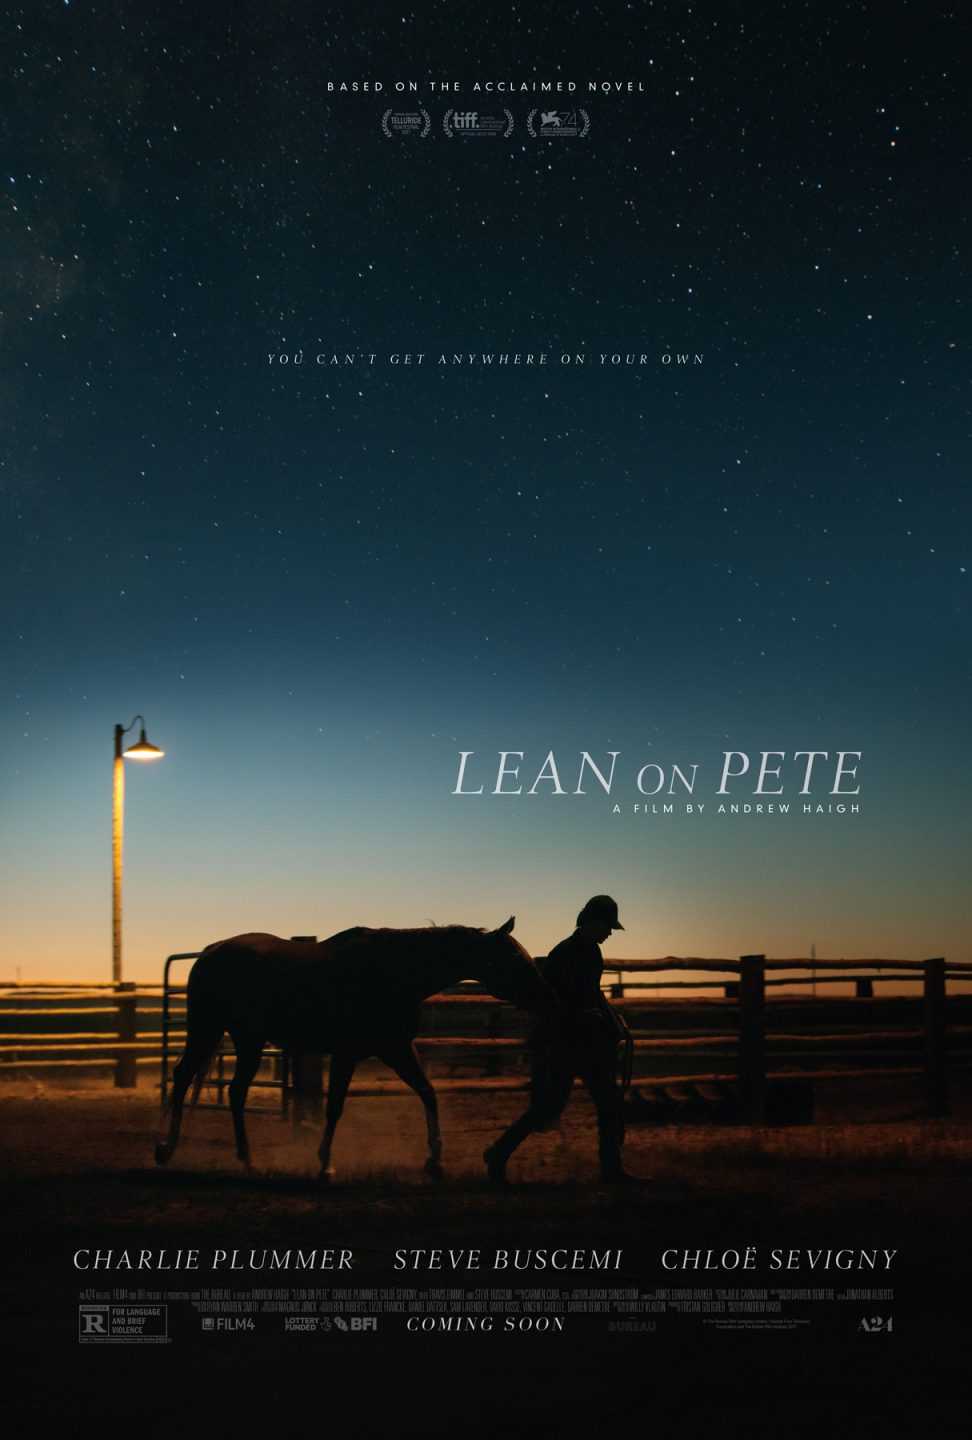 Lean On Pete poster (A24 Films)